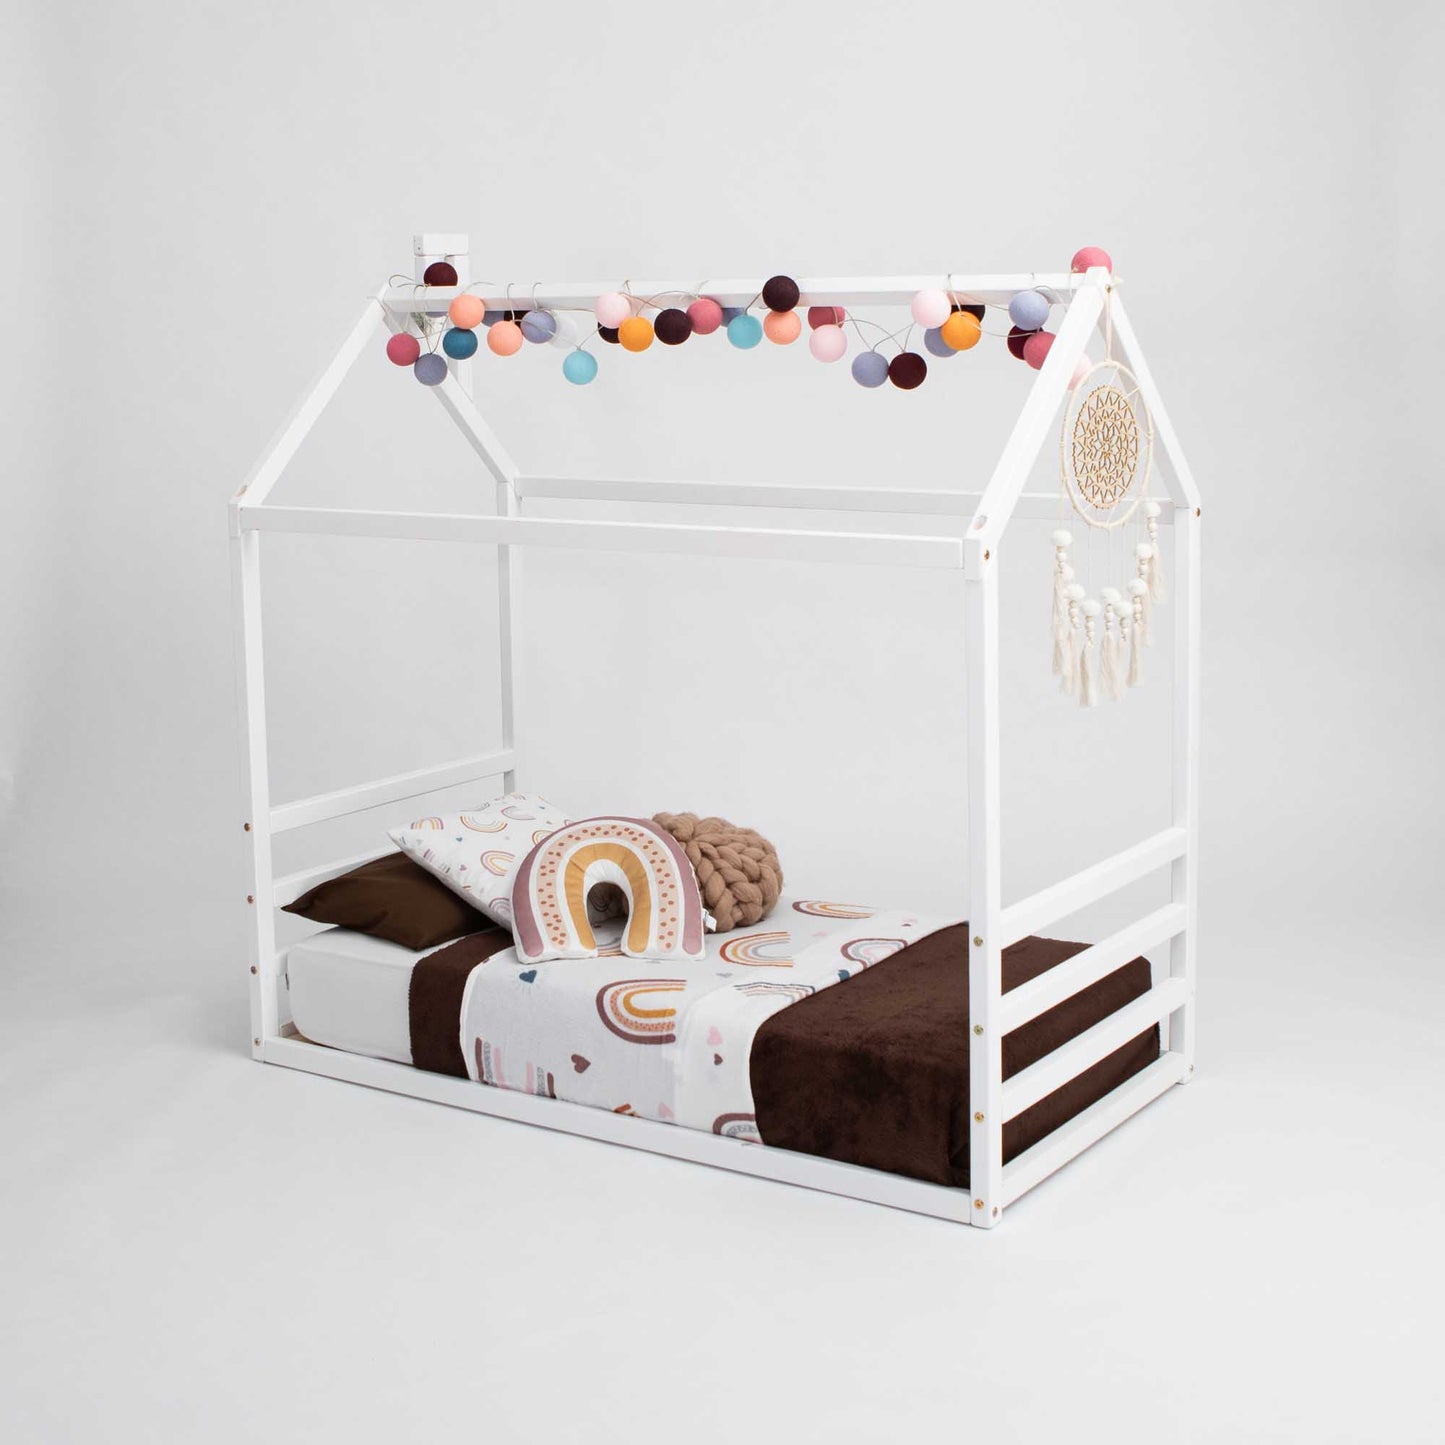 A low platform bed with a wooden frame and pom poms, perfect as a Floor house-frame bed with a horizontal headboard and footboard for toddlers.